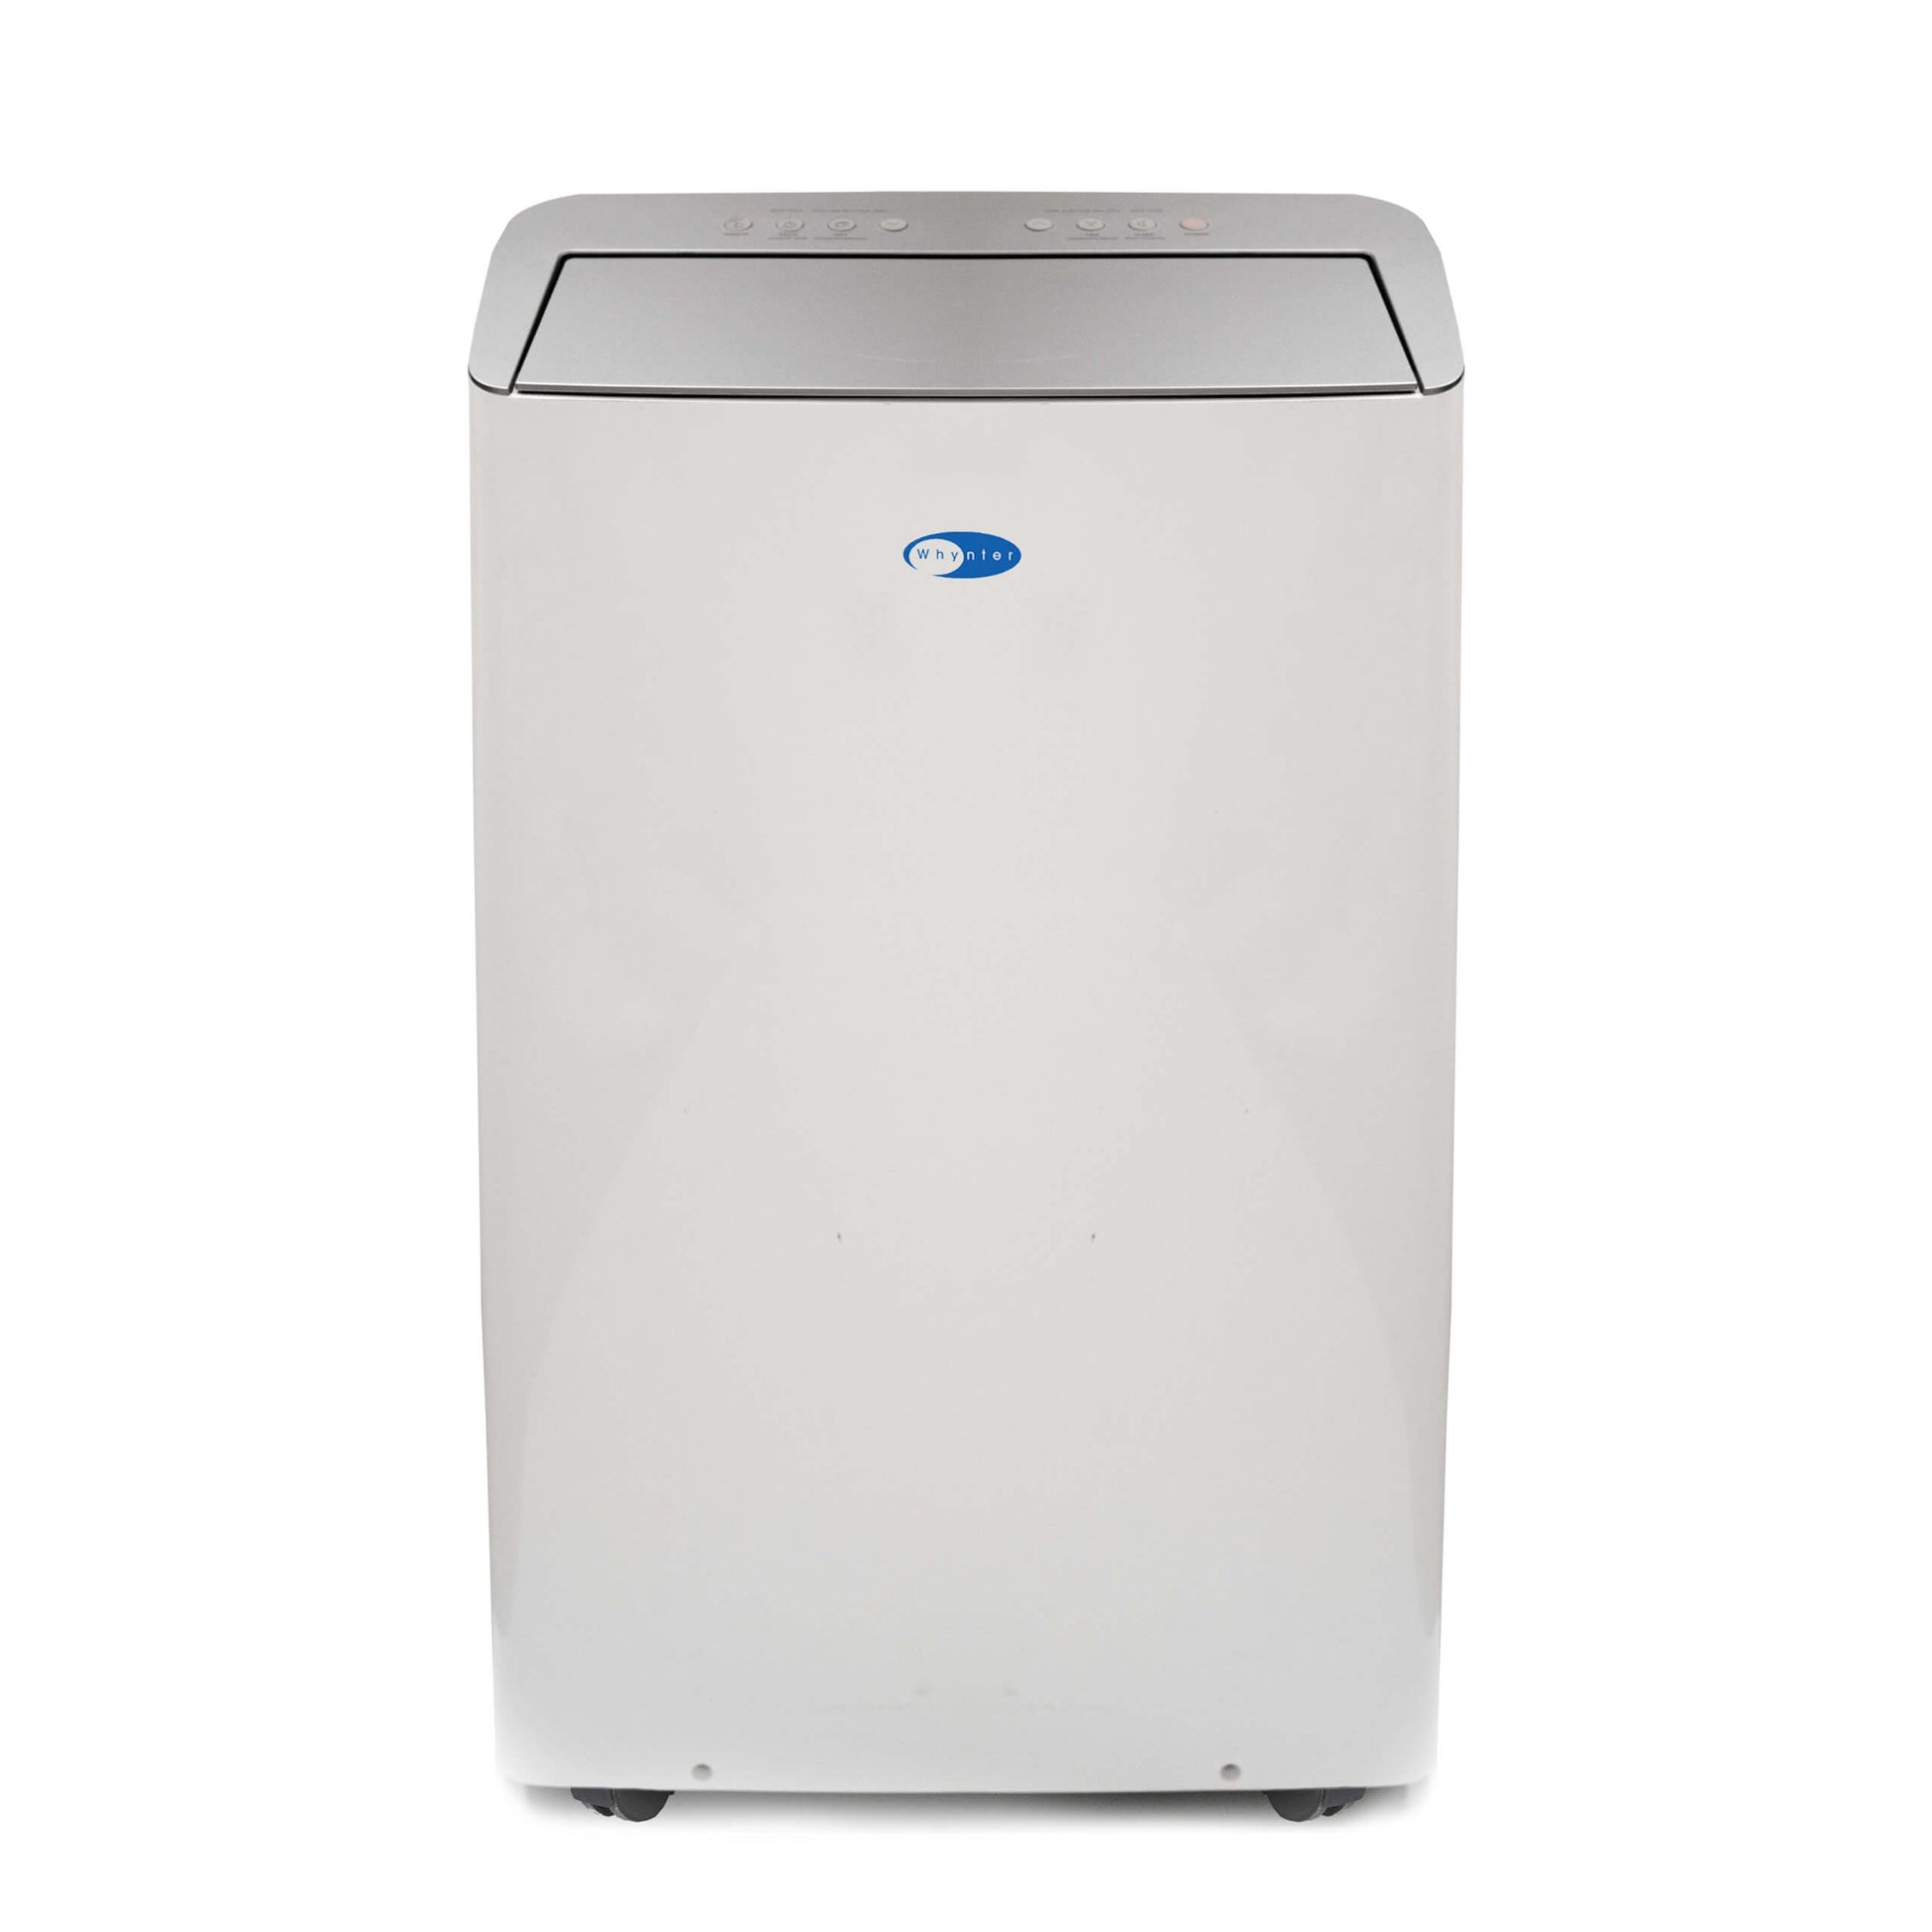 Whynter Air Conditioners Whynter ARC-1230WN 14,000 BTU (12,000 BTU SACC) NEX Inverter Dual Hose Cooling Portable Air Conditioner, Dehumidifier, and Fan with Smart Wi-Fi, up to 600 sq ft in White